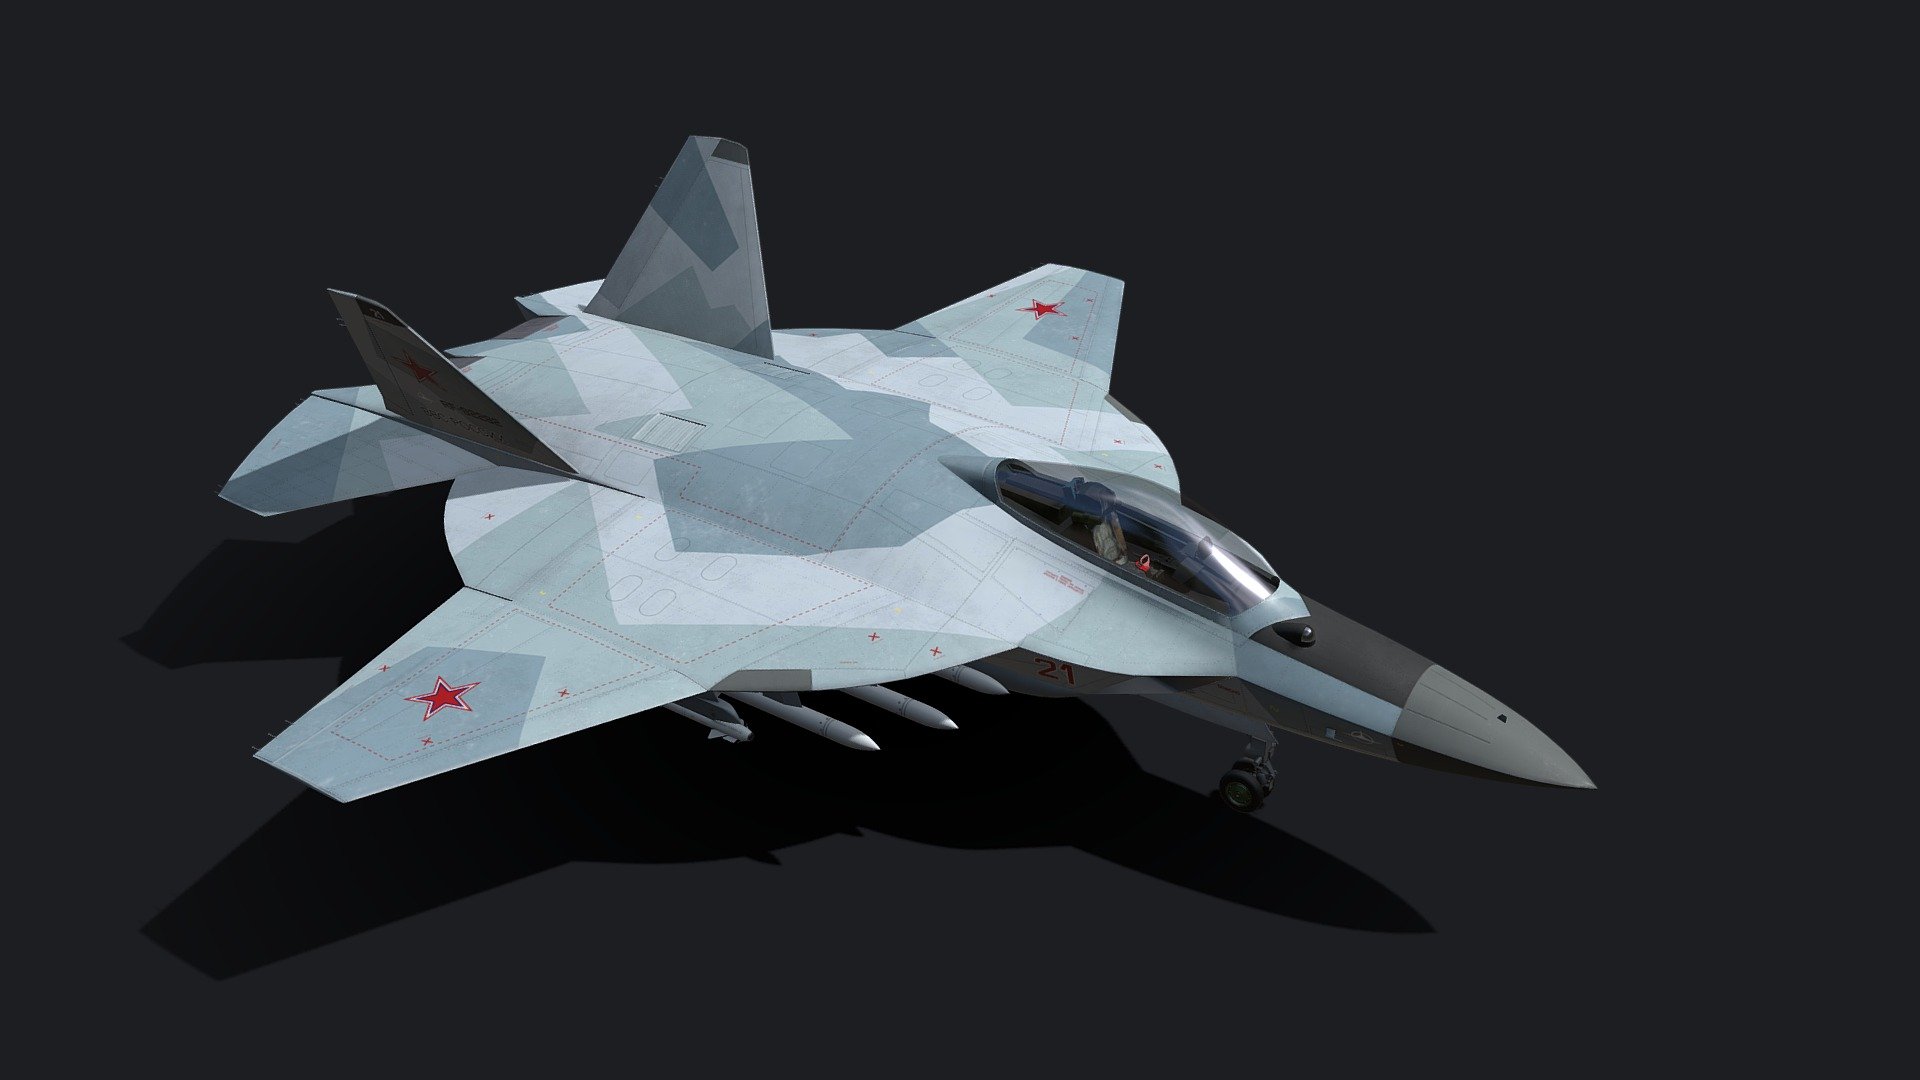 The I-2000 LFS is a concept-plane made for the LFS project. However, the project was cancelled in favor of the PAK FA program (which later resulted in the Su-57). The S-55 LFS was also spawned from this project (which also appears in the AFD series). This would not be the end for the interesting I-2000, however; the plans influenced the design of a recent aircraft, the Iranian HESA Shafaq. As a result, the I-2000 interestingly lives on through that plane 3d model